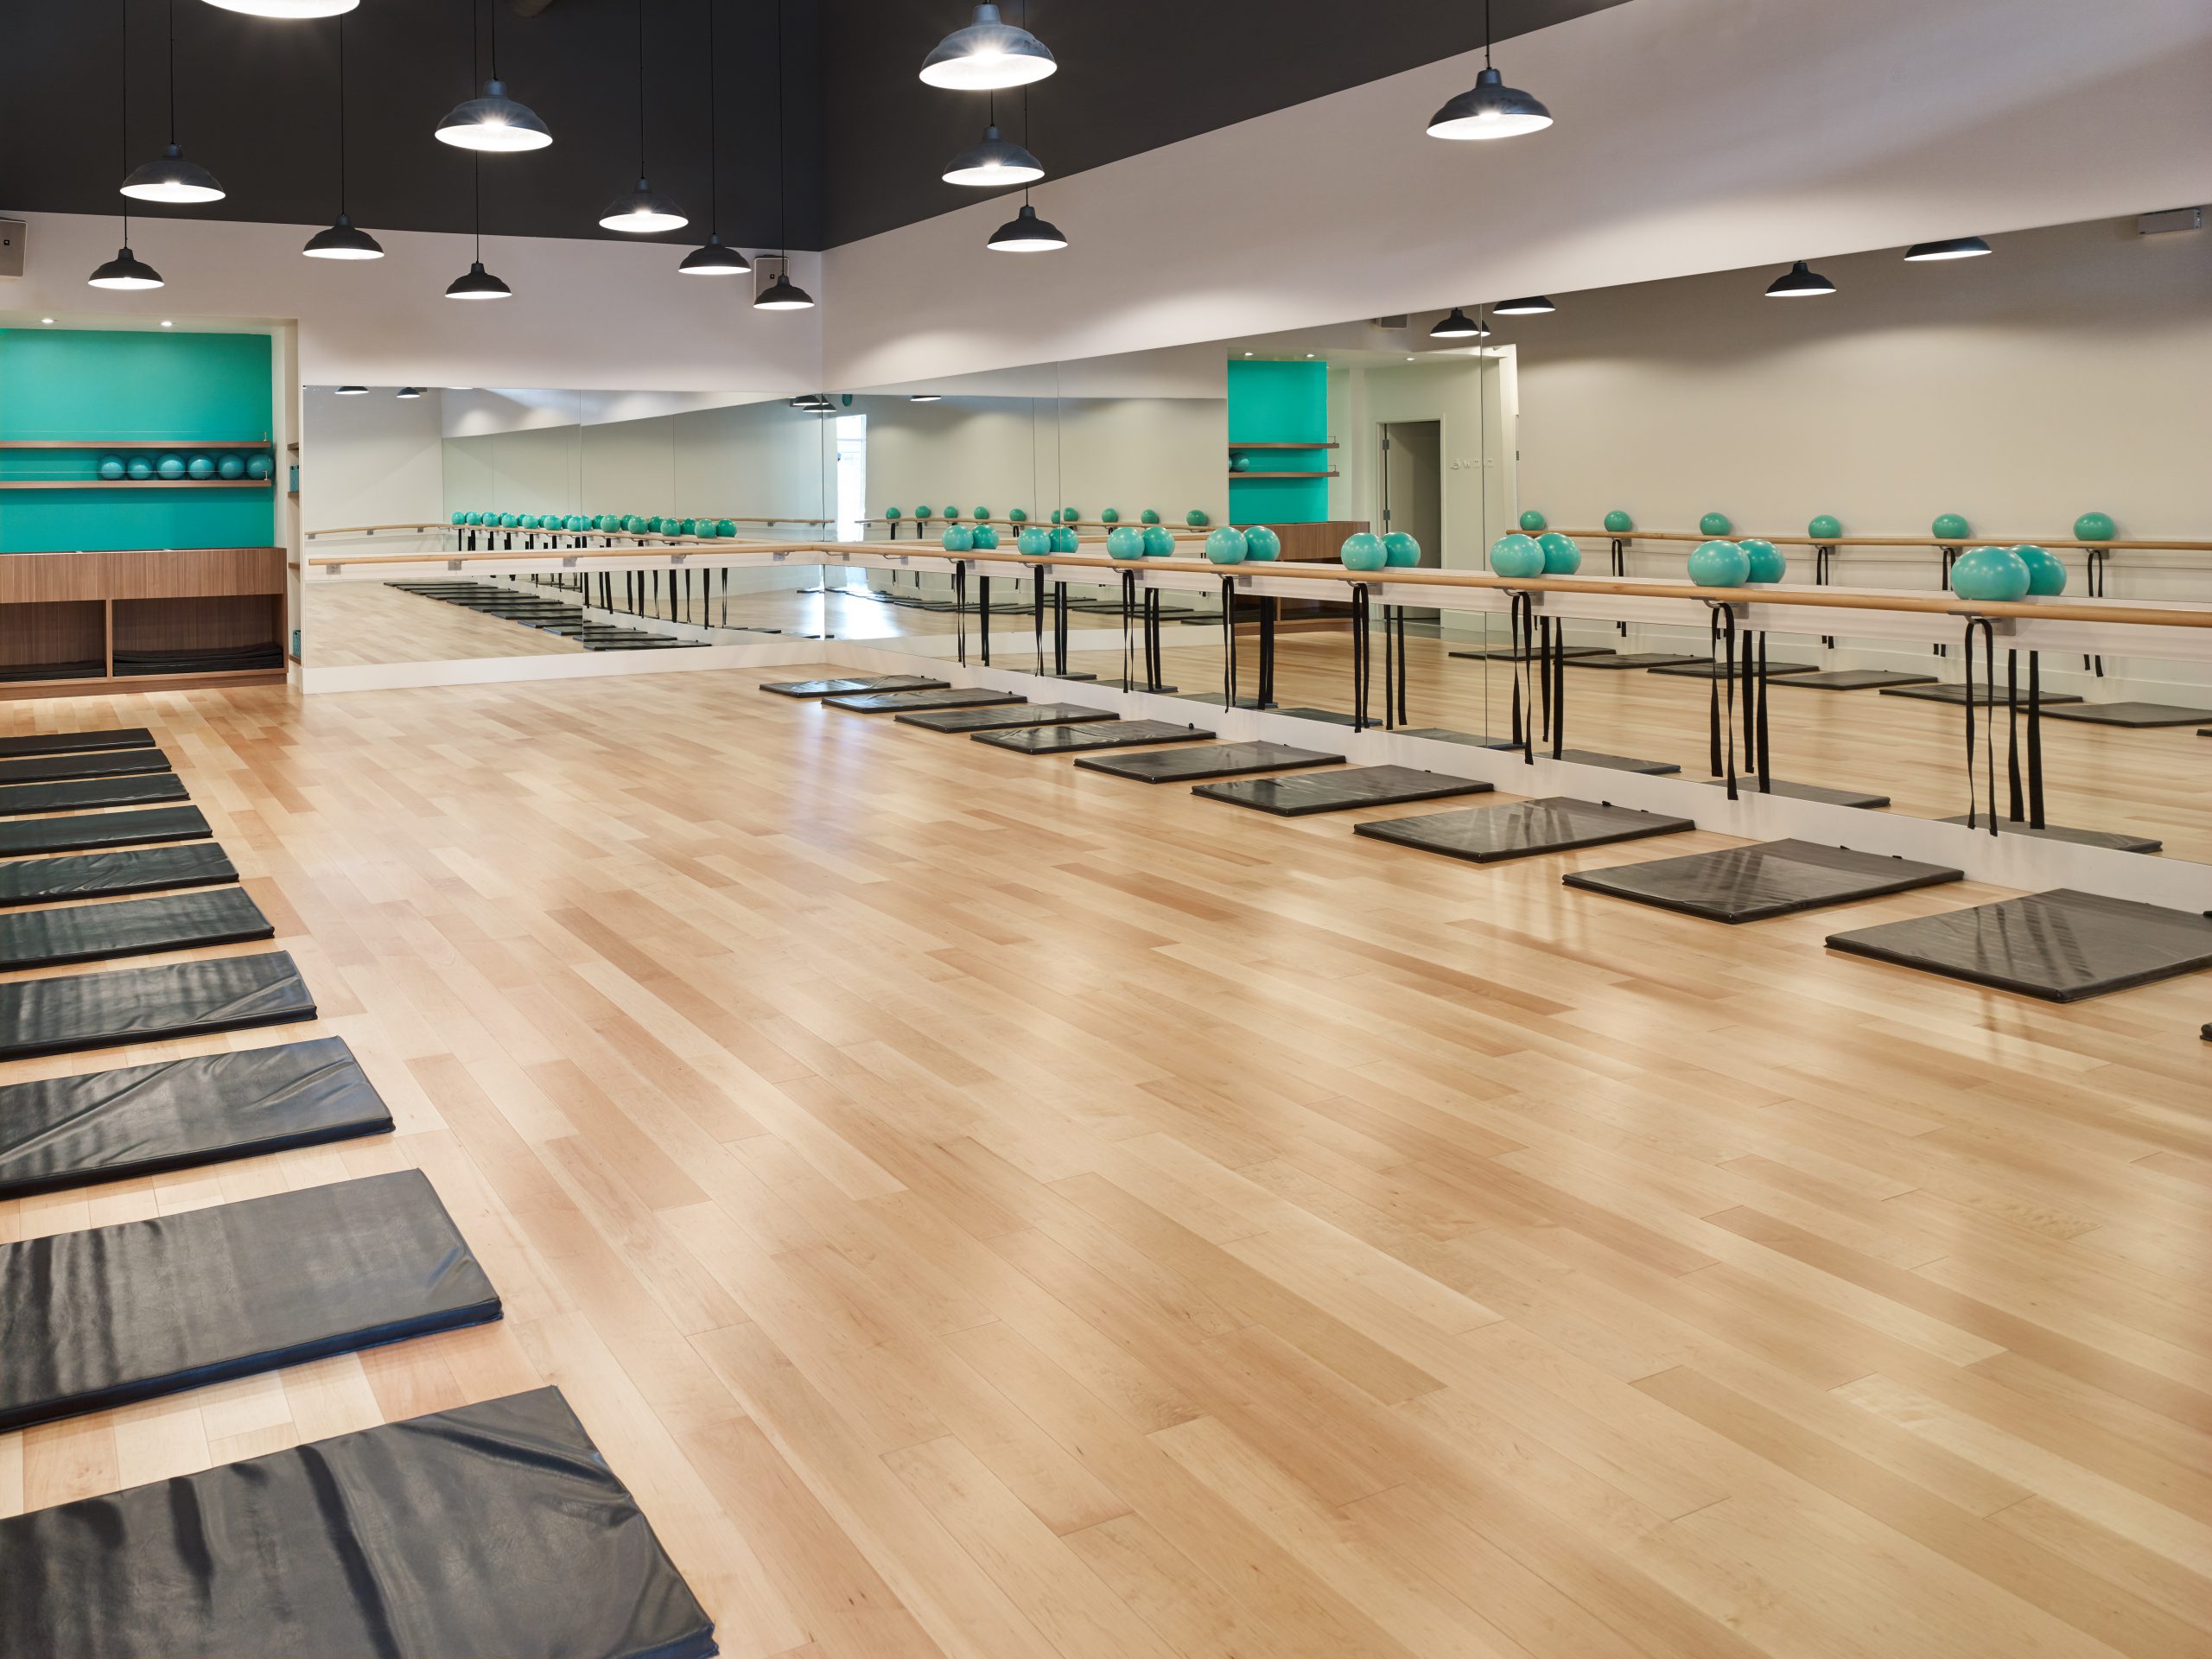 Barre Fitness Surrey in Surrey BC   by Cutler